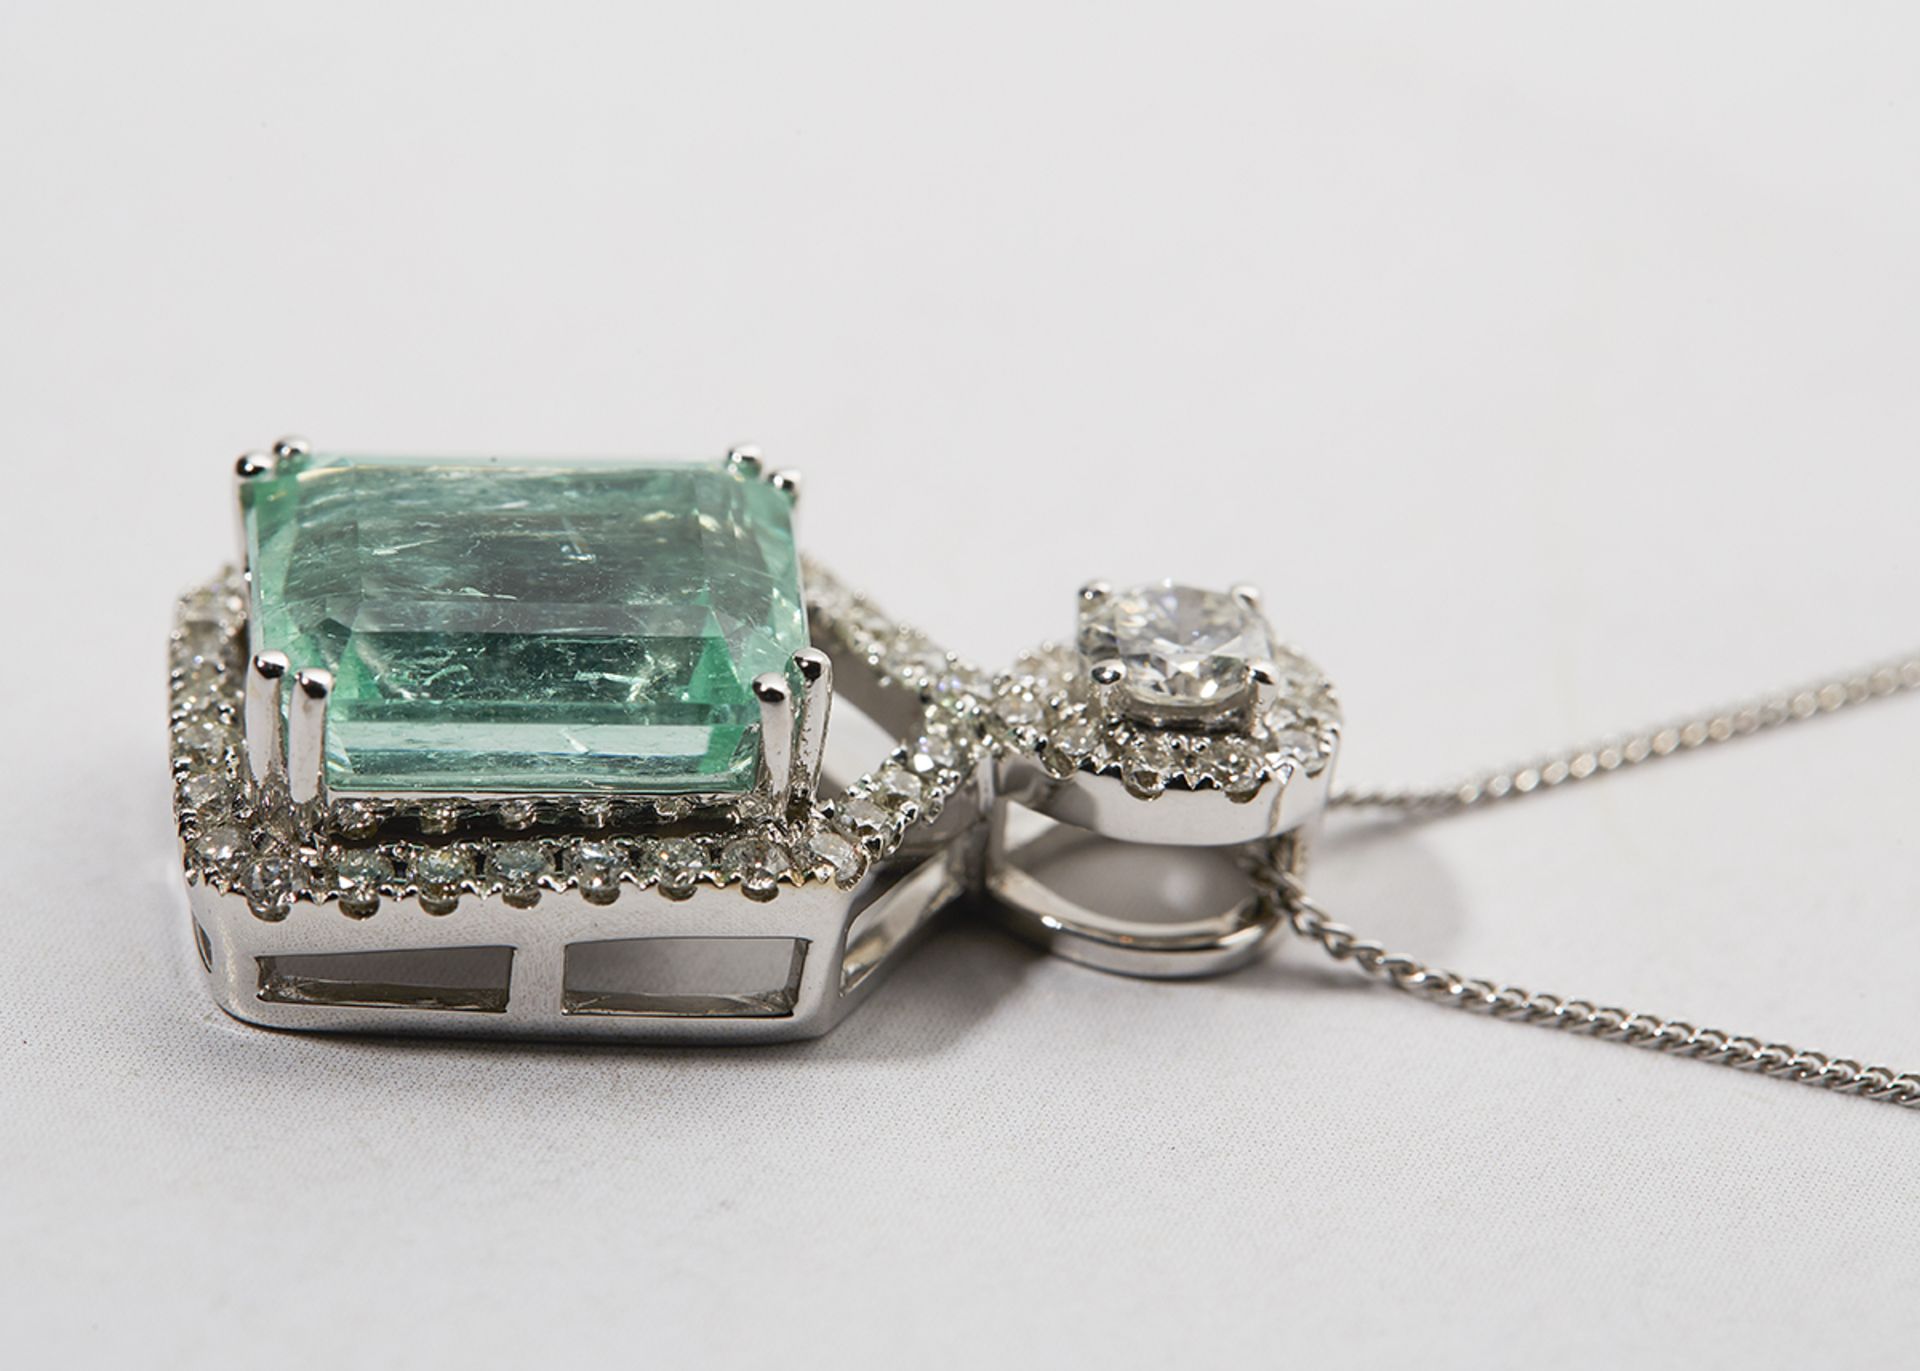 18k White Gold 5.00ct Colombian Emerald & 0.66ct Diamond Necklace - Image 2 of 7